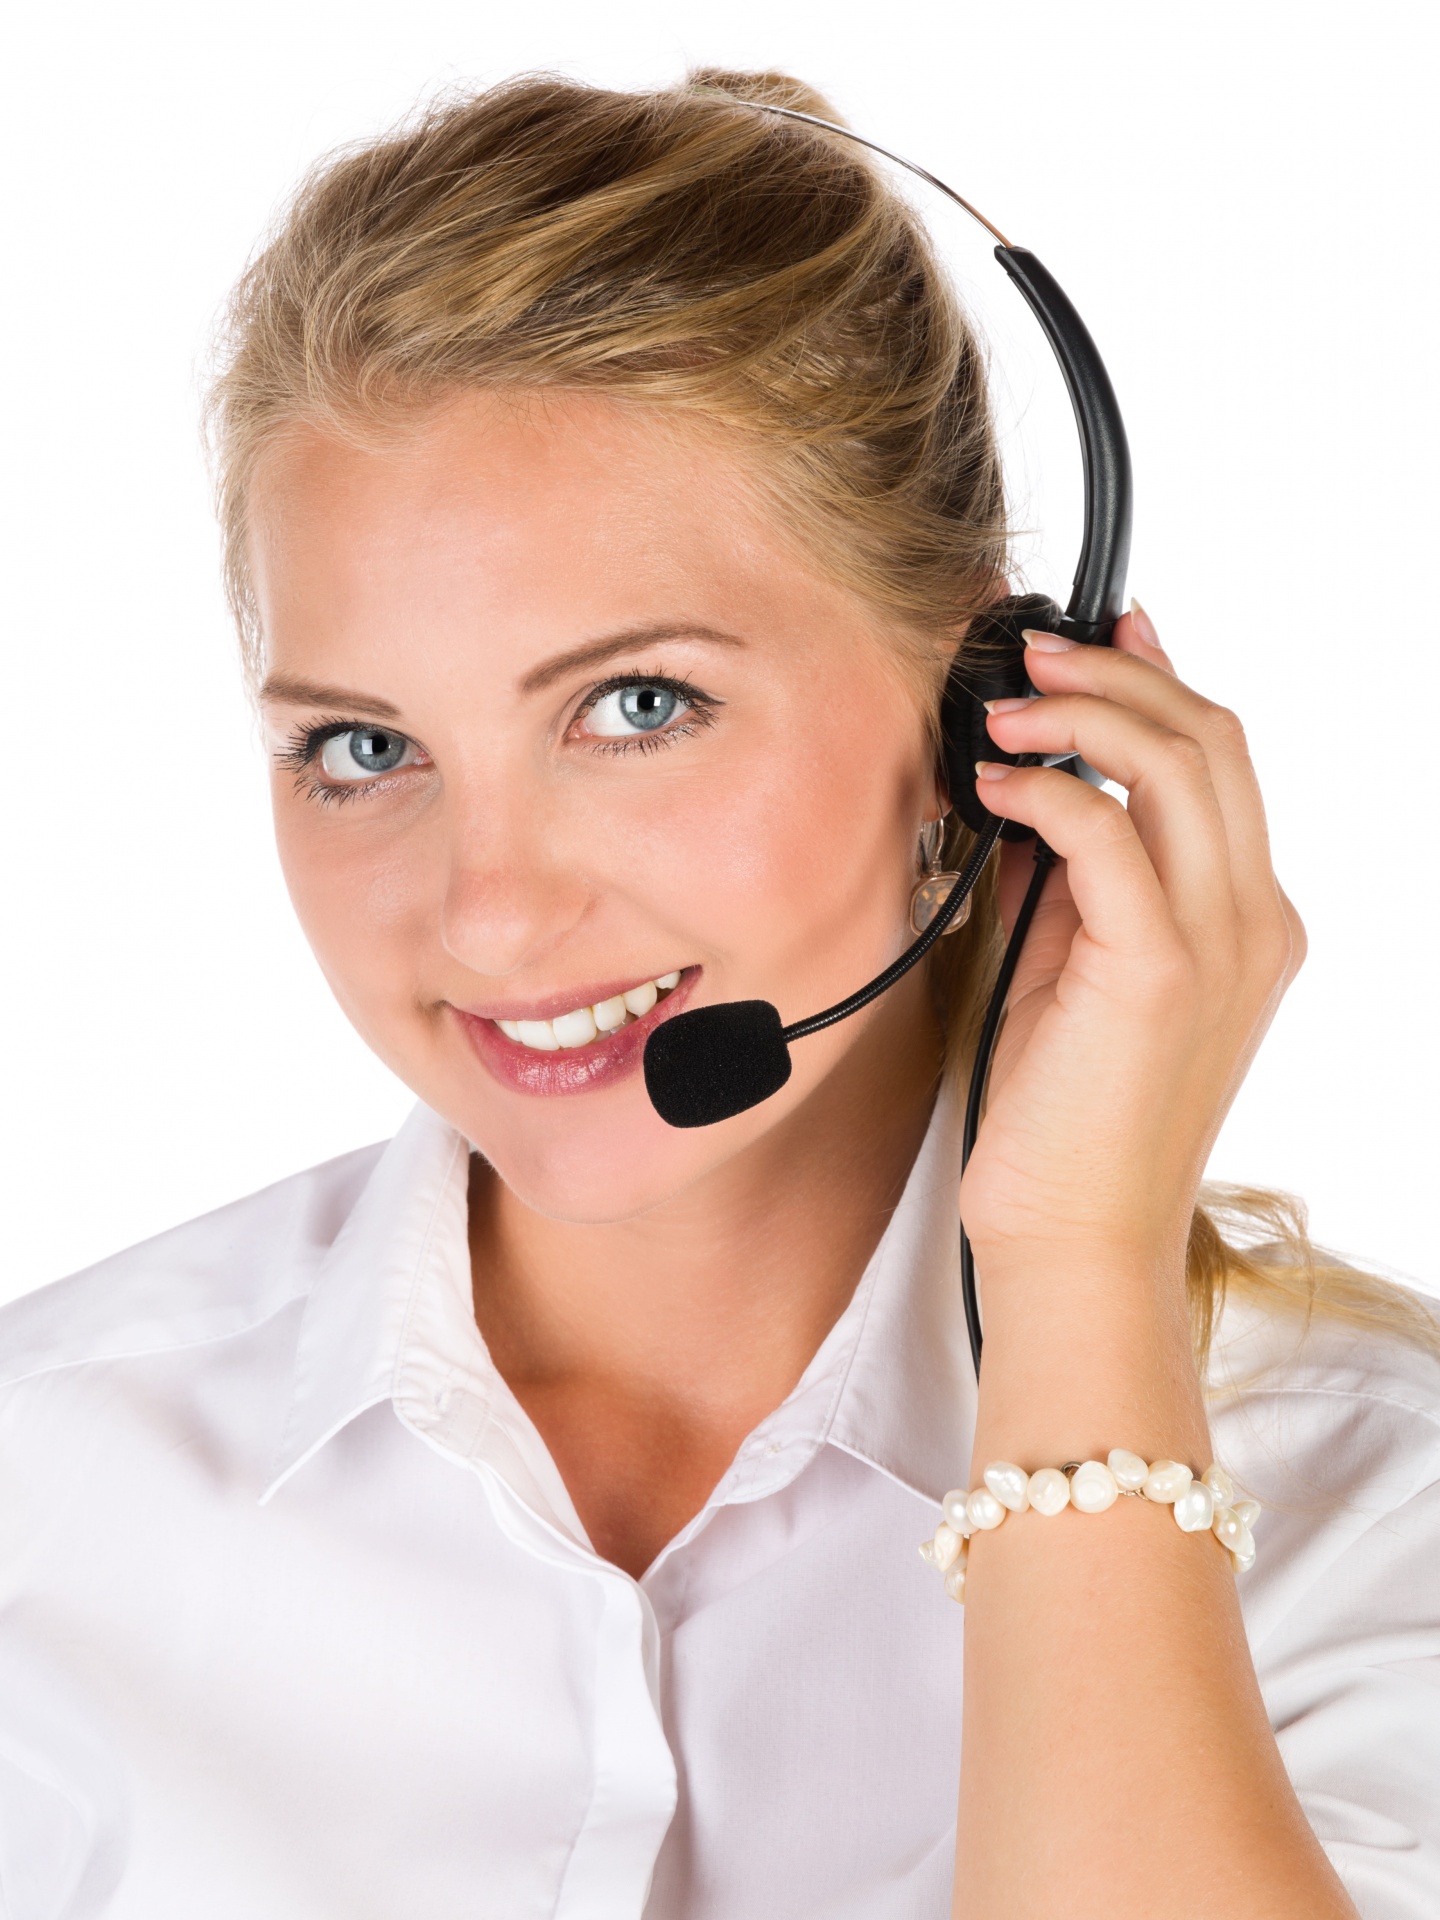 https://www.publicdomainpictures.net/pictures/210000/velka/business-woman-with-a-headset-1488653372SND.jpg